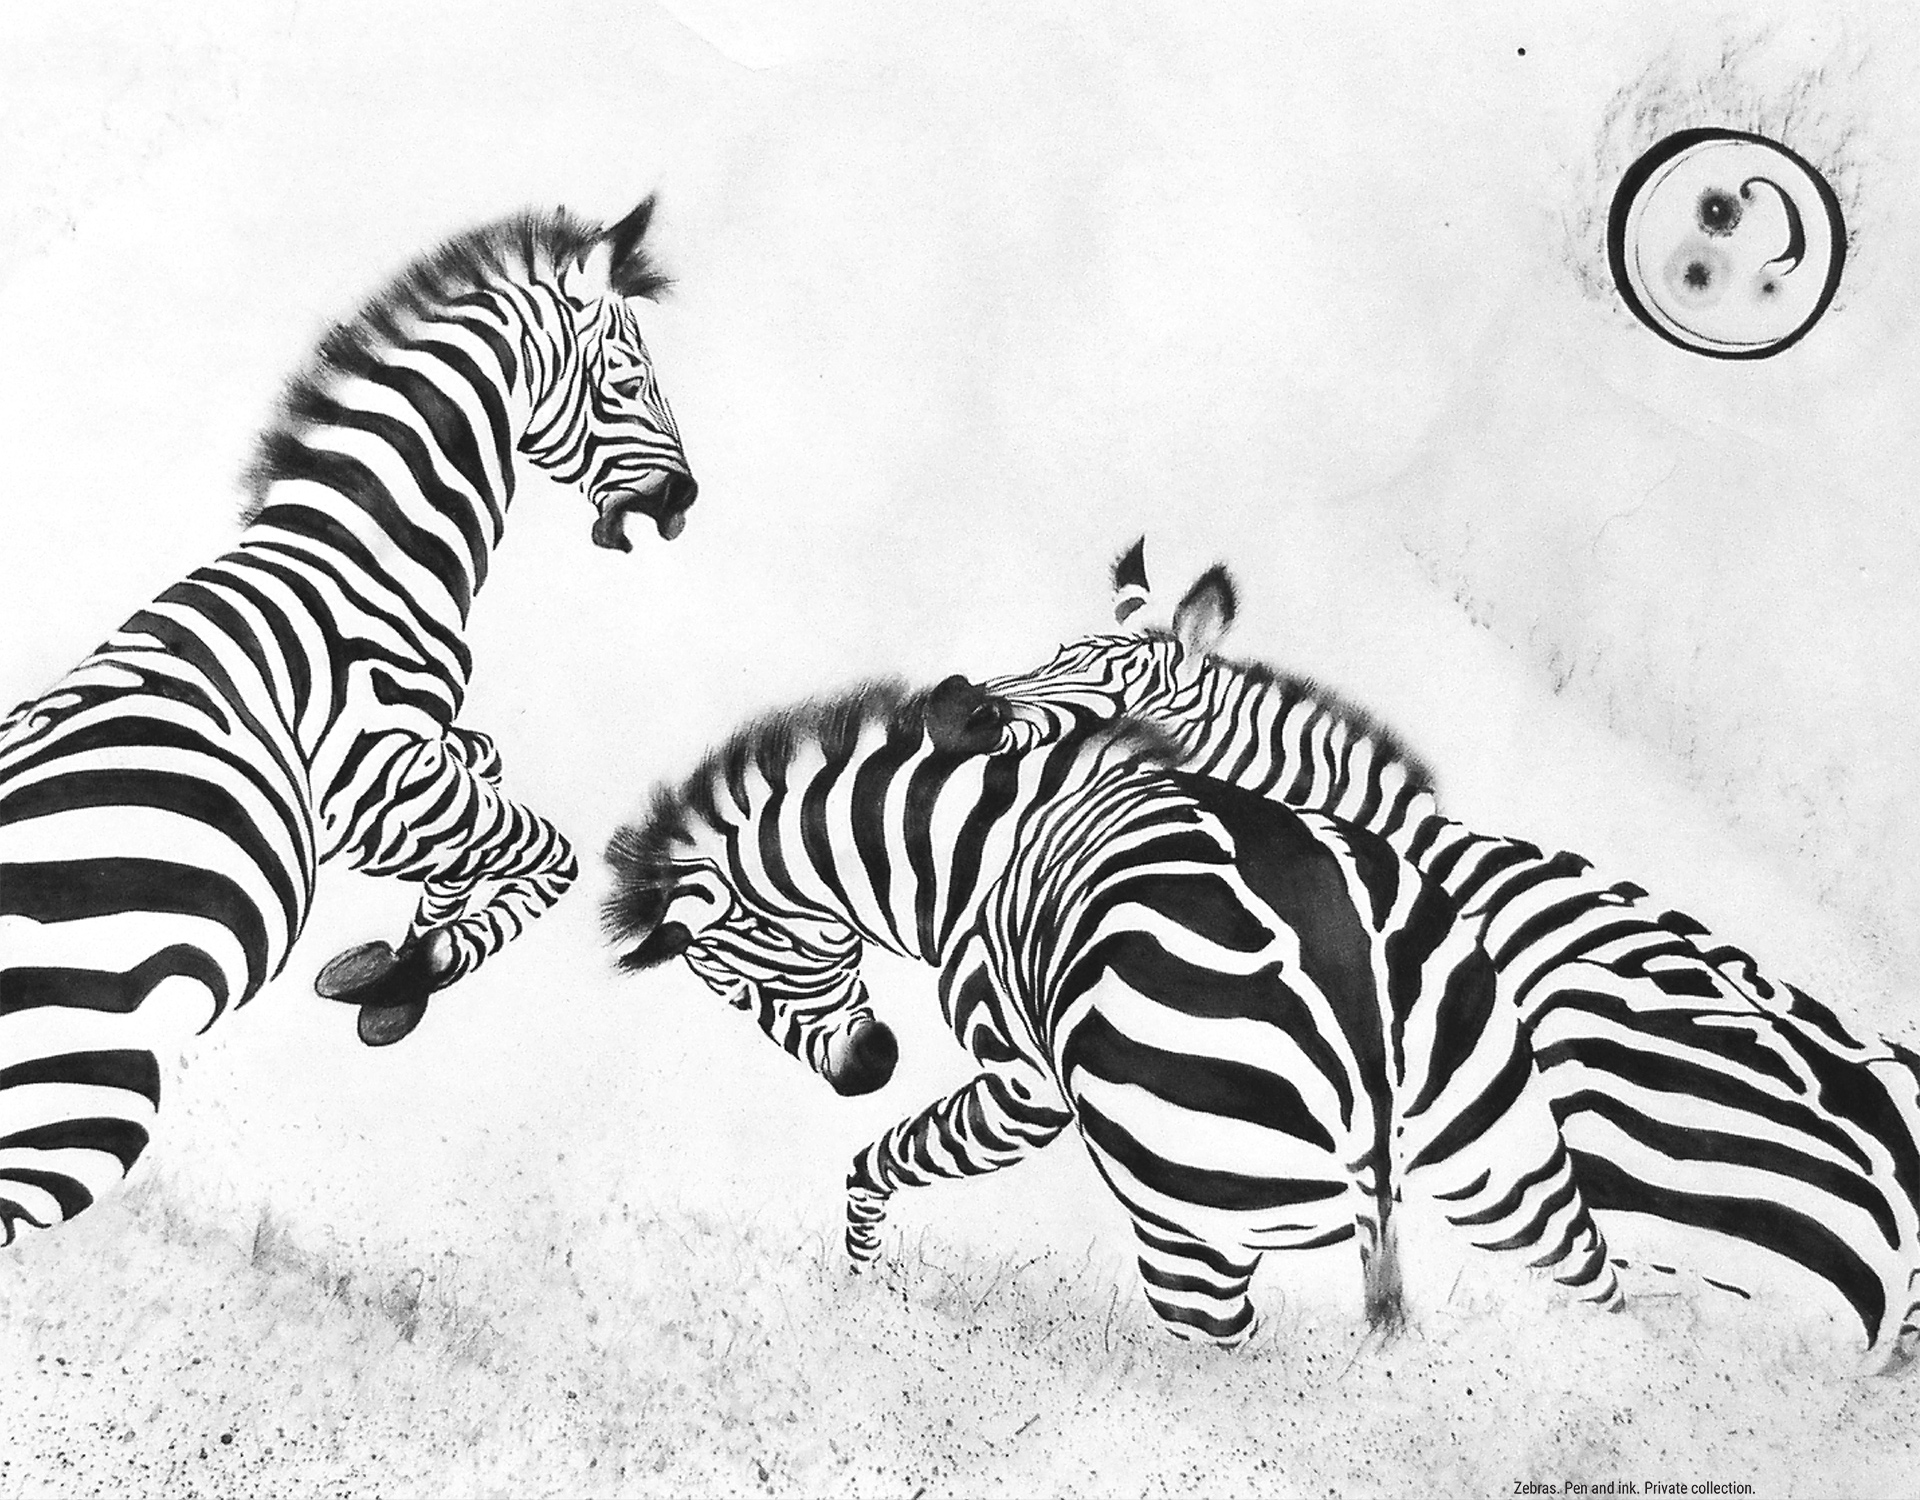 Zebras. Pen and ink. Private collection.